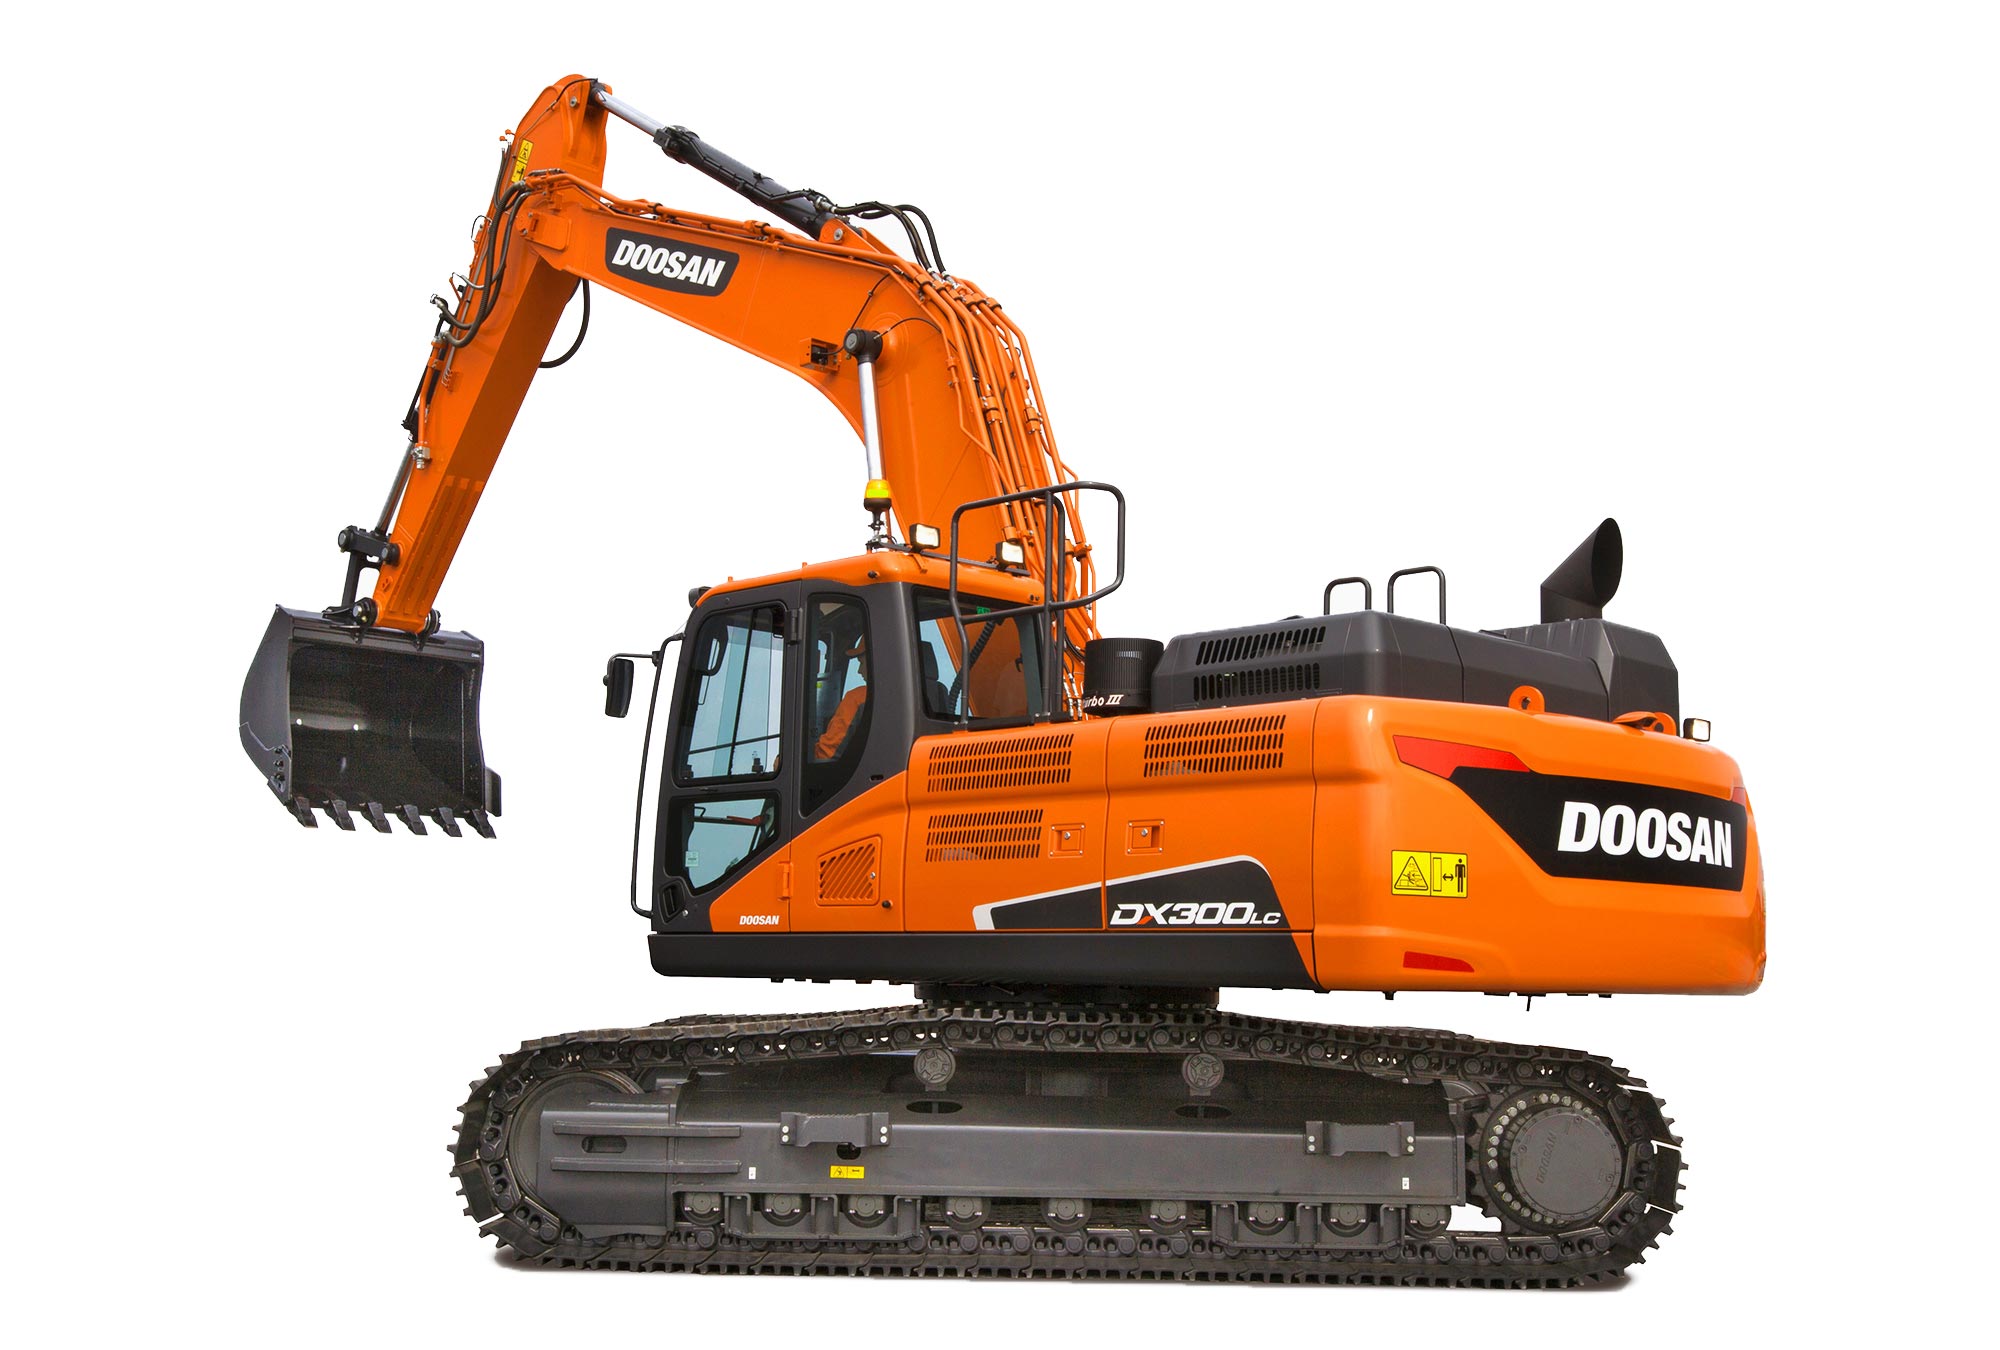 Long term 30 tonne excavator hire in the UK